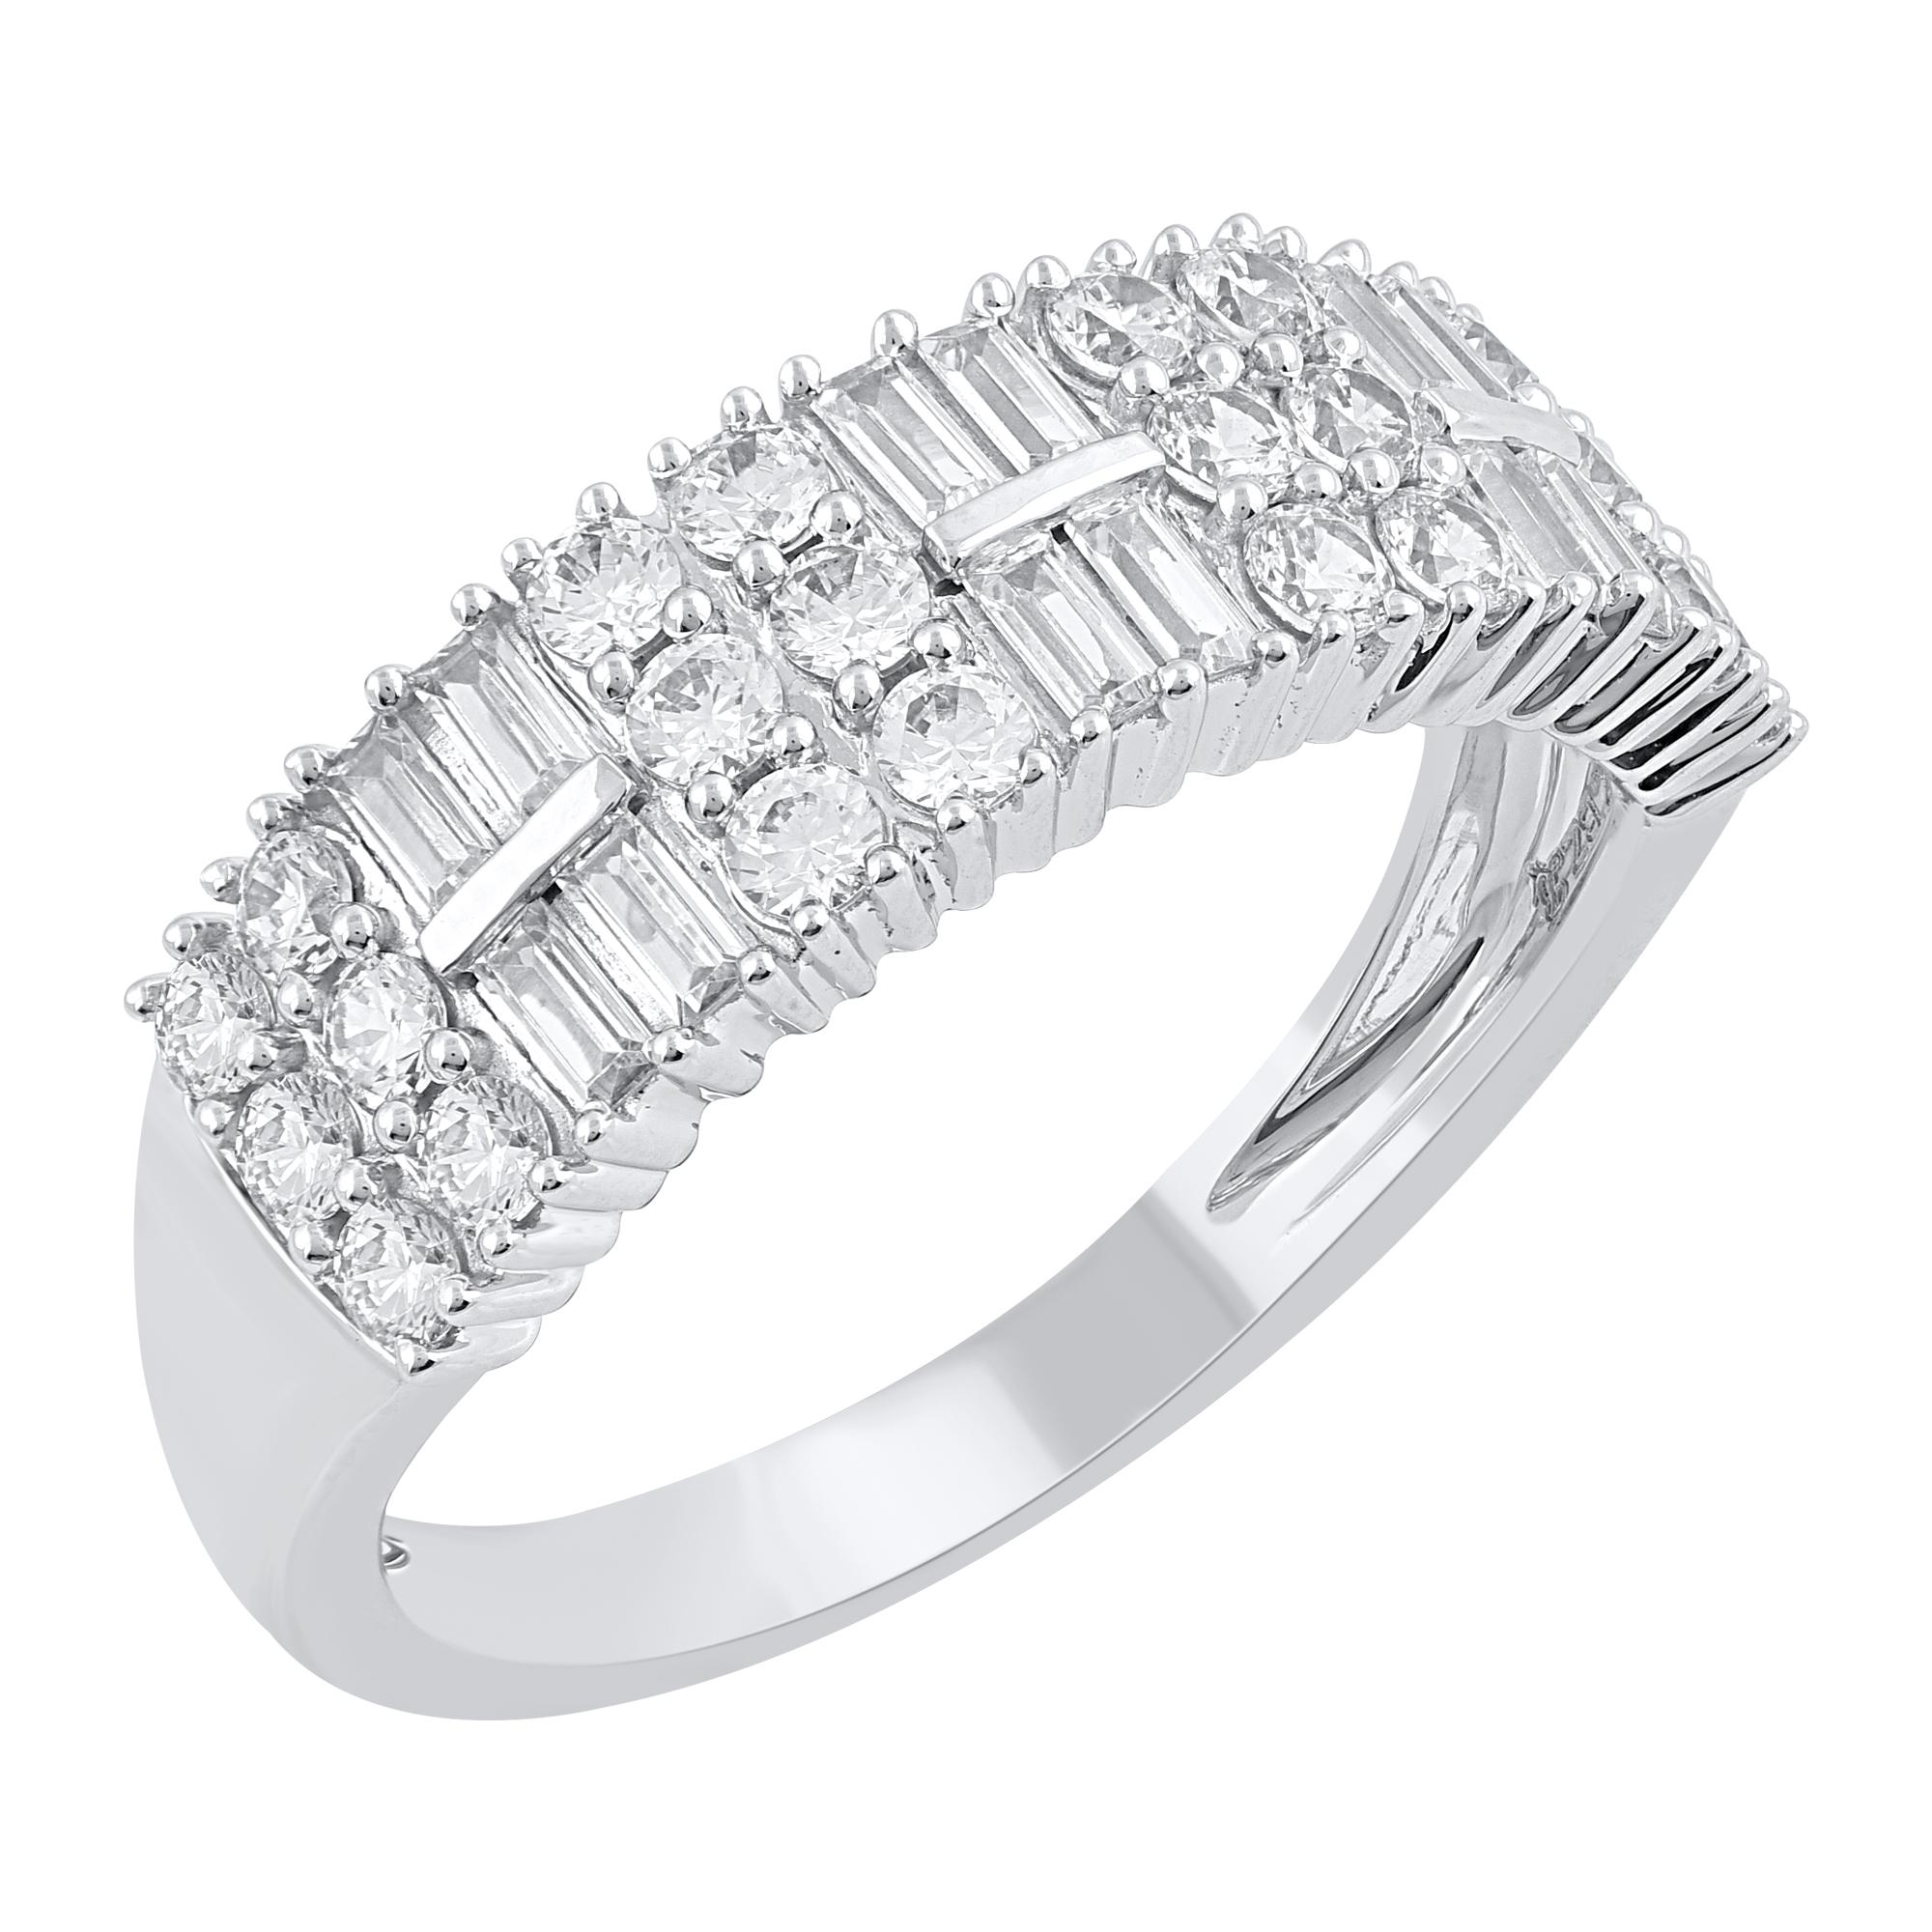 Complete your bridal look with a timeless design. These band rings crafted in 18 karat white gold with 36 brilliant cut & baguette natural diamonds in prong & channel setting. Total diamond weight is 1.0 carat. The white diamonds are graded as H-I